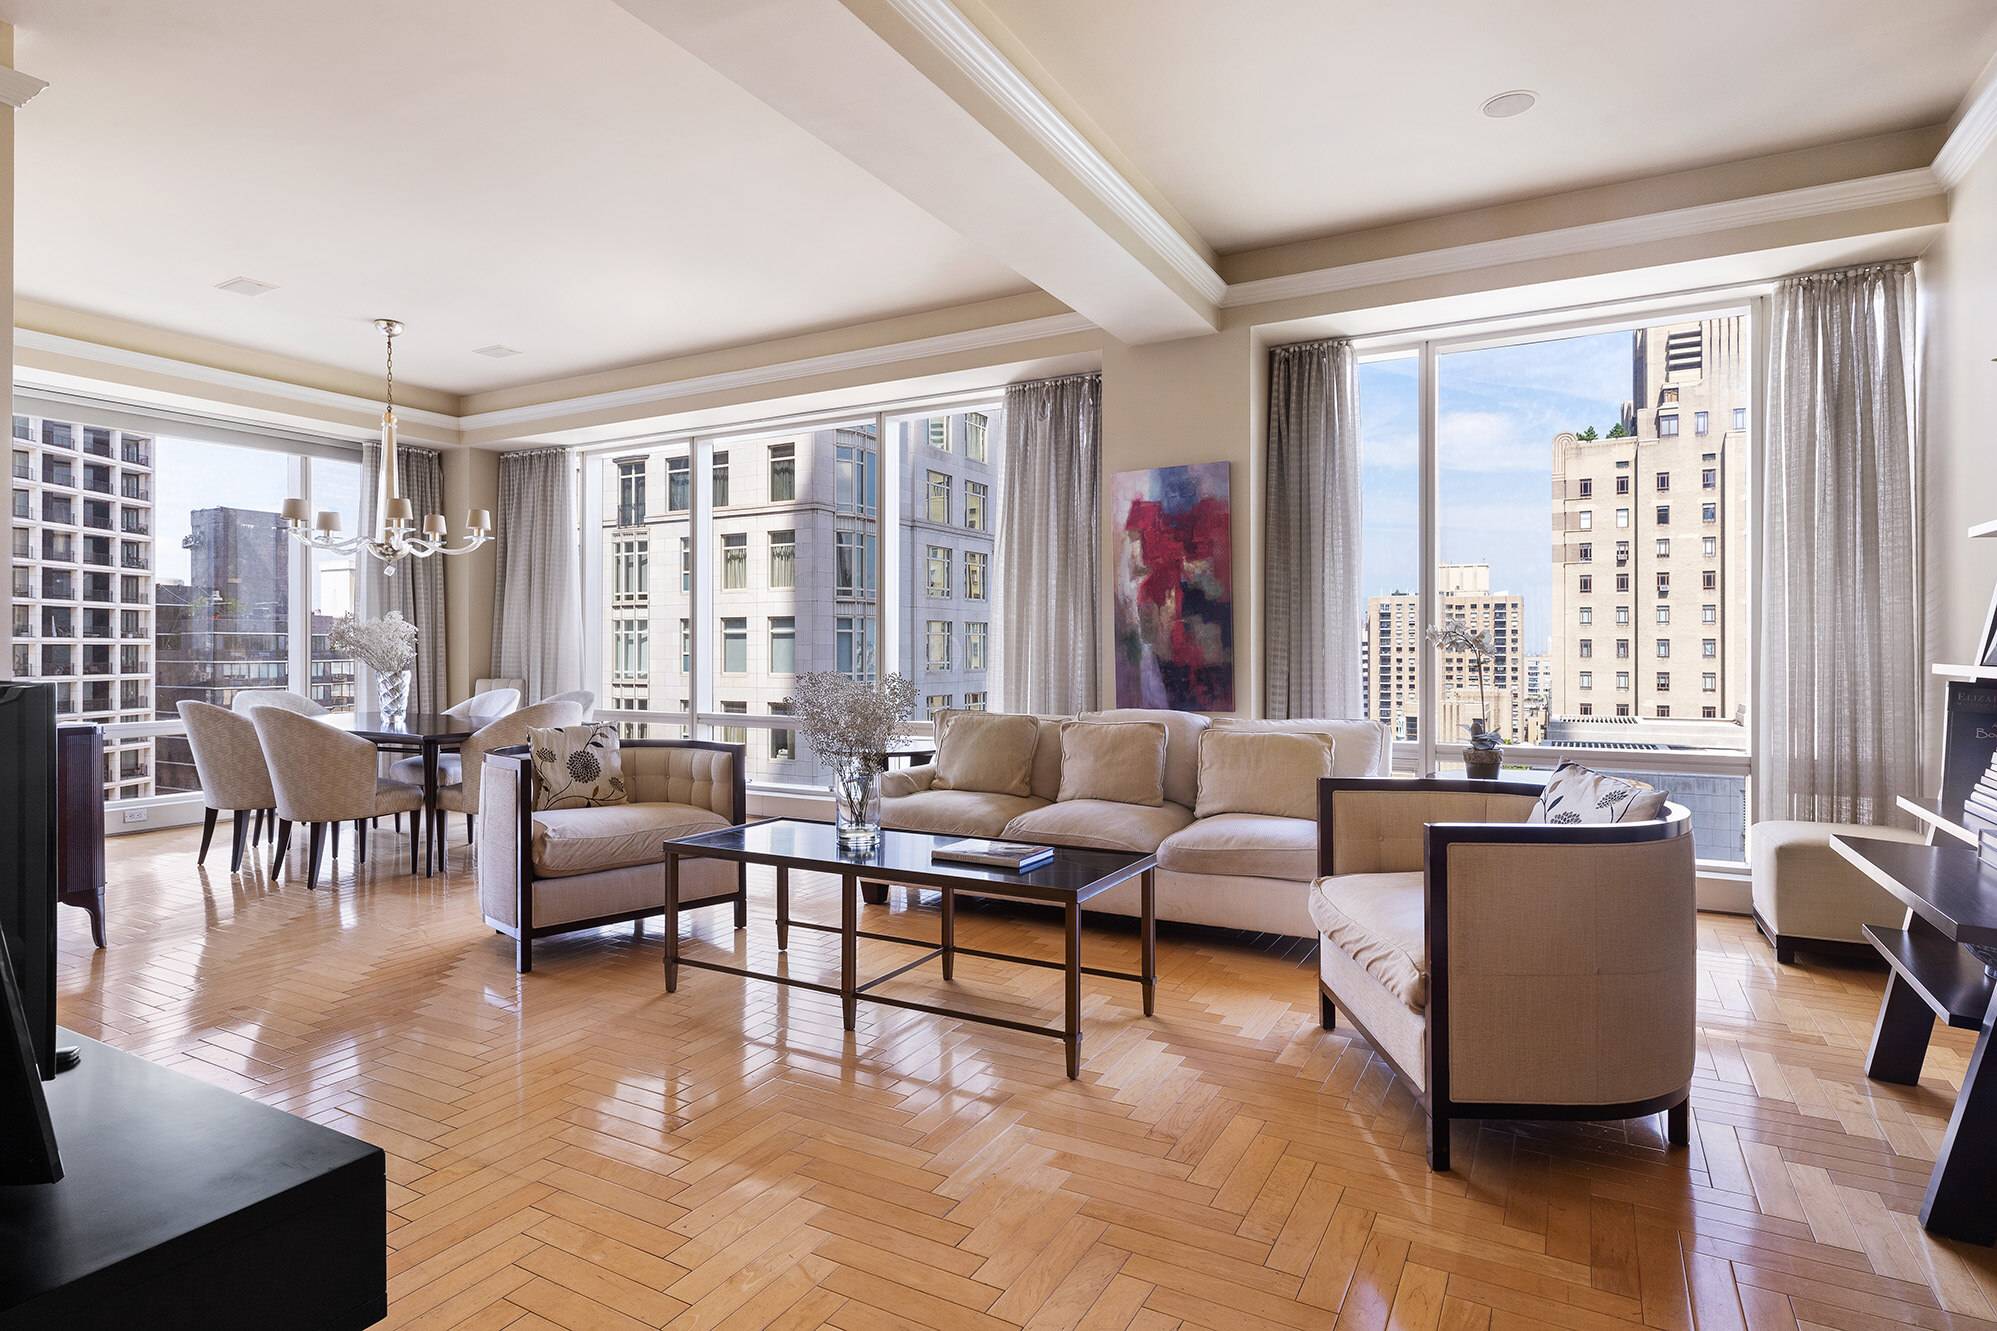 Situated at the northwest corner of One Central Park West, residence 27G presents 2 bedrooms and 2.